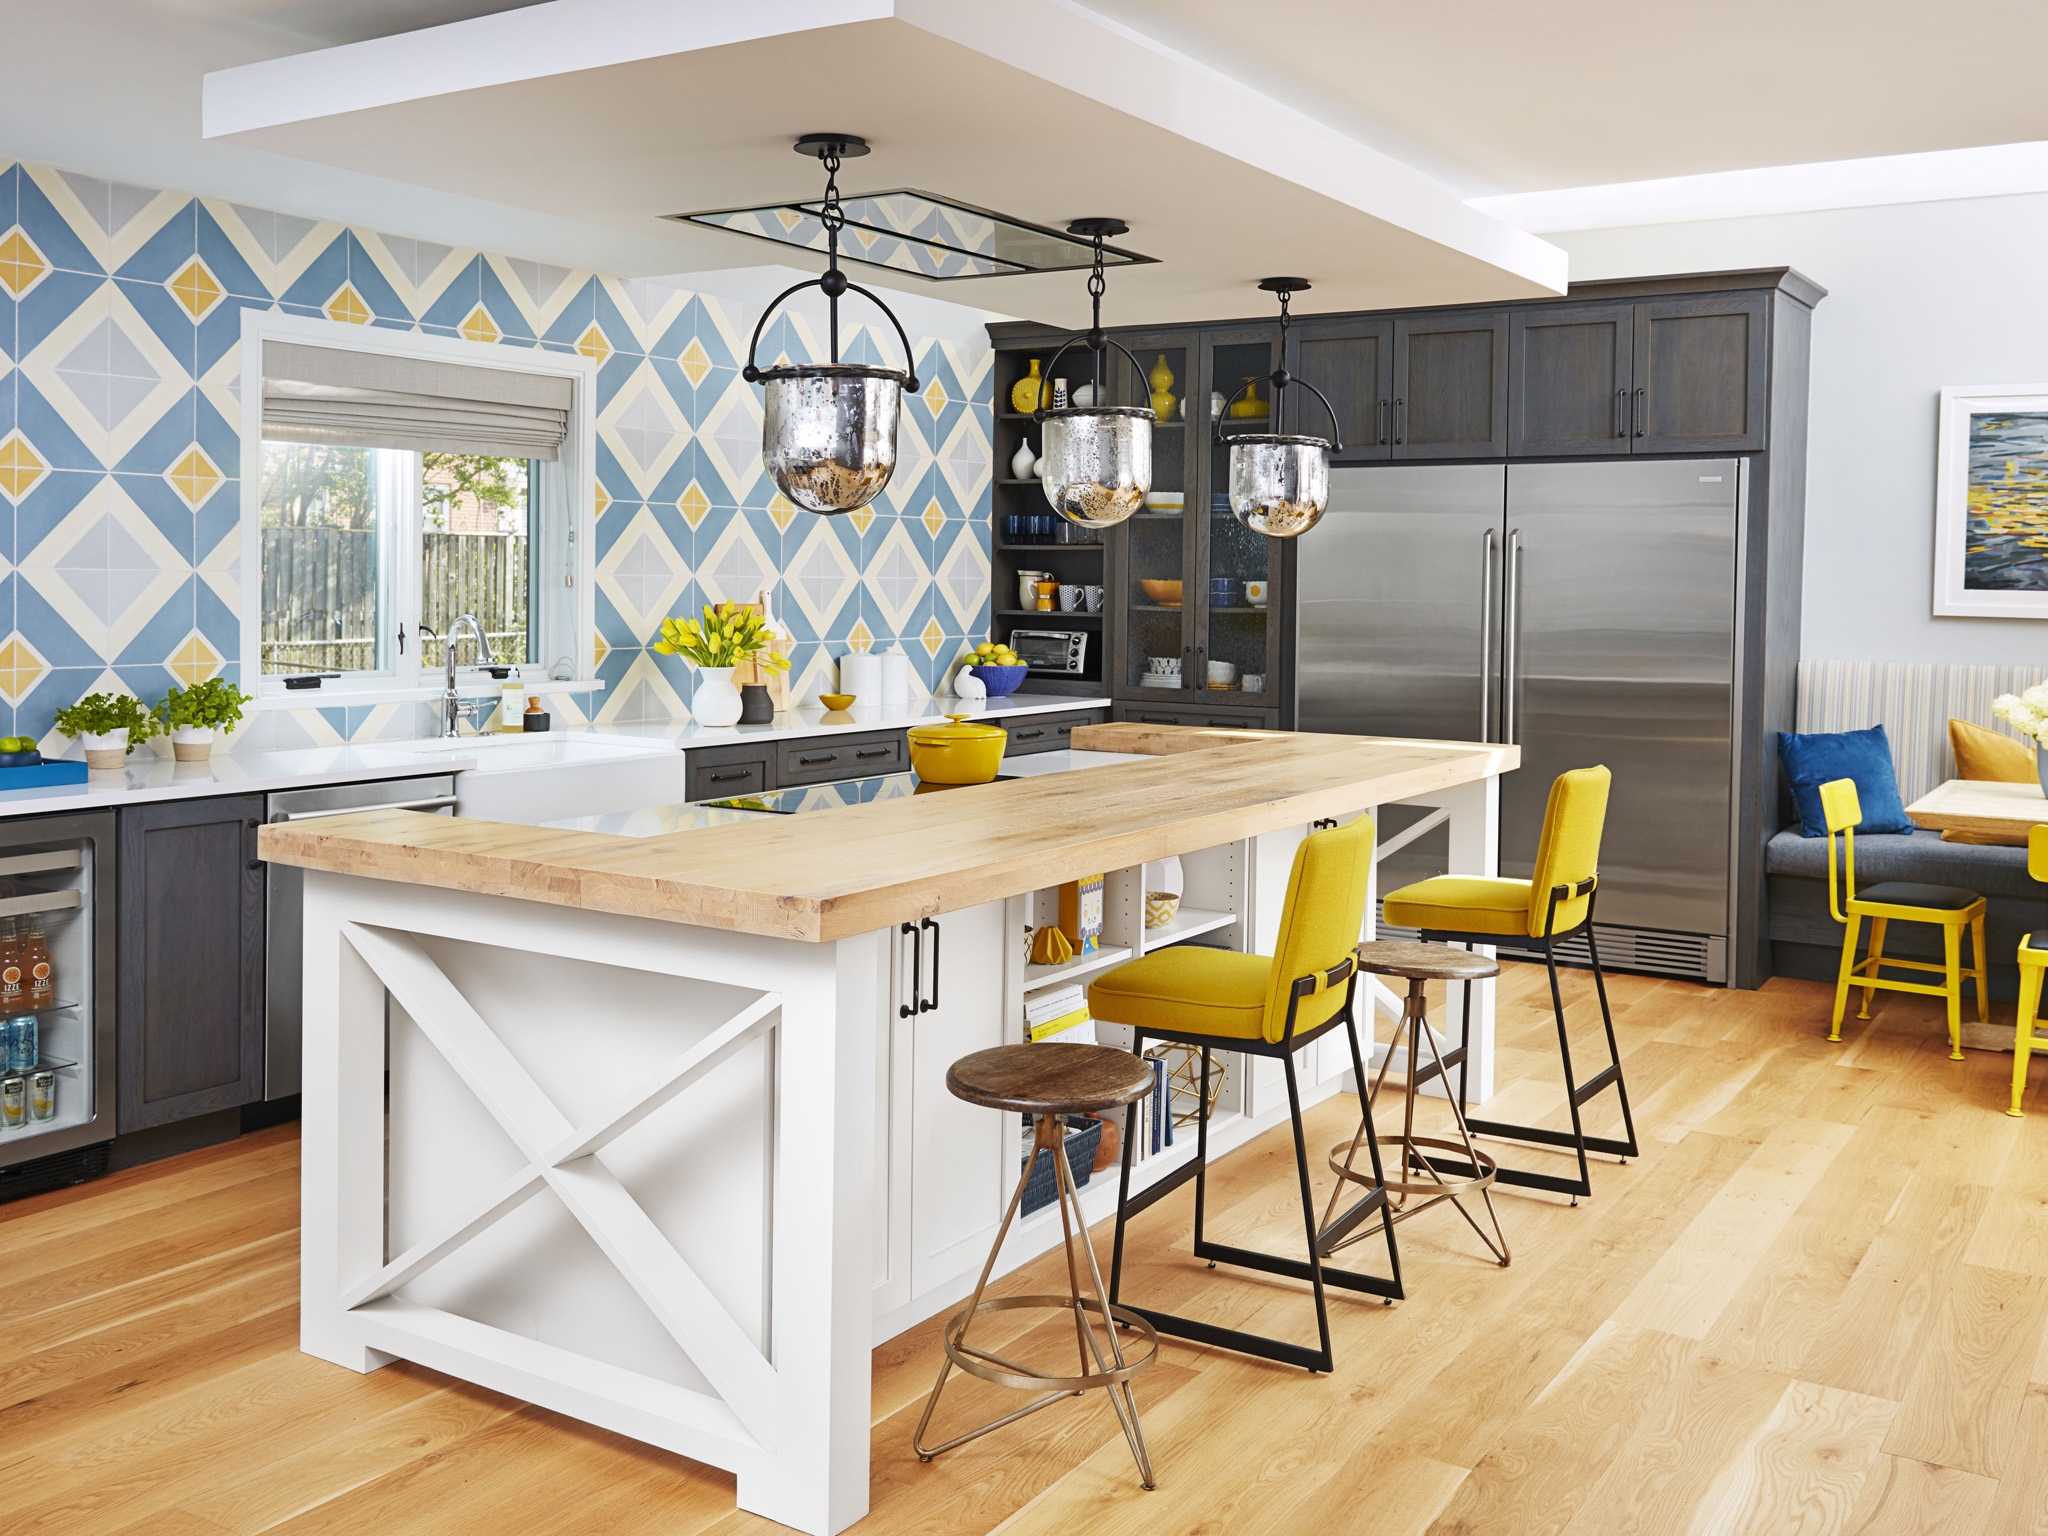 20 Amazing Ideas For Complete Kitchen Remodel